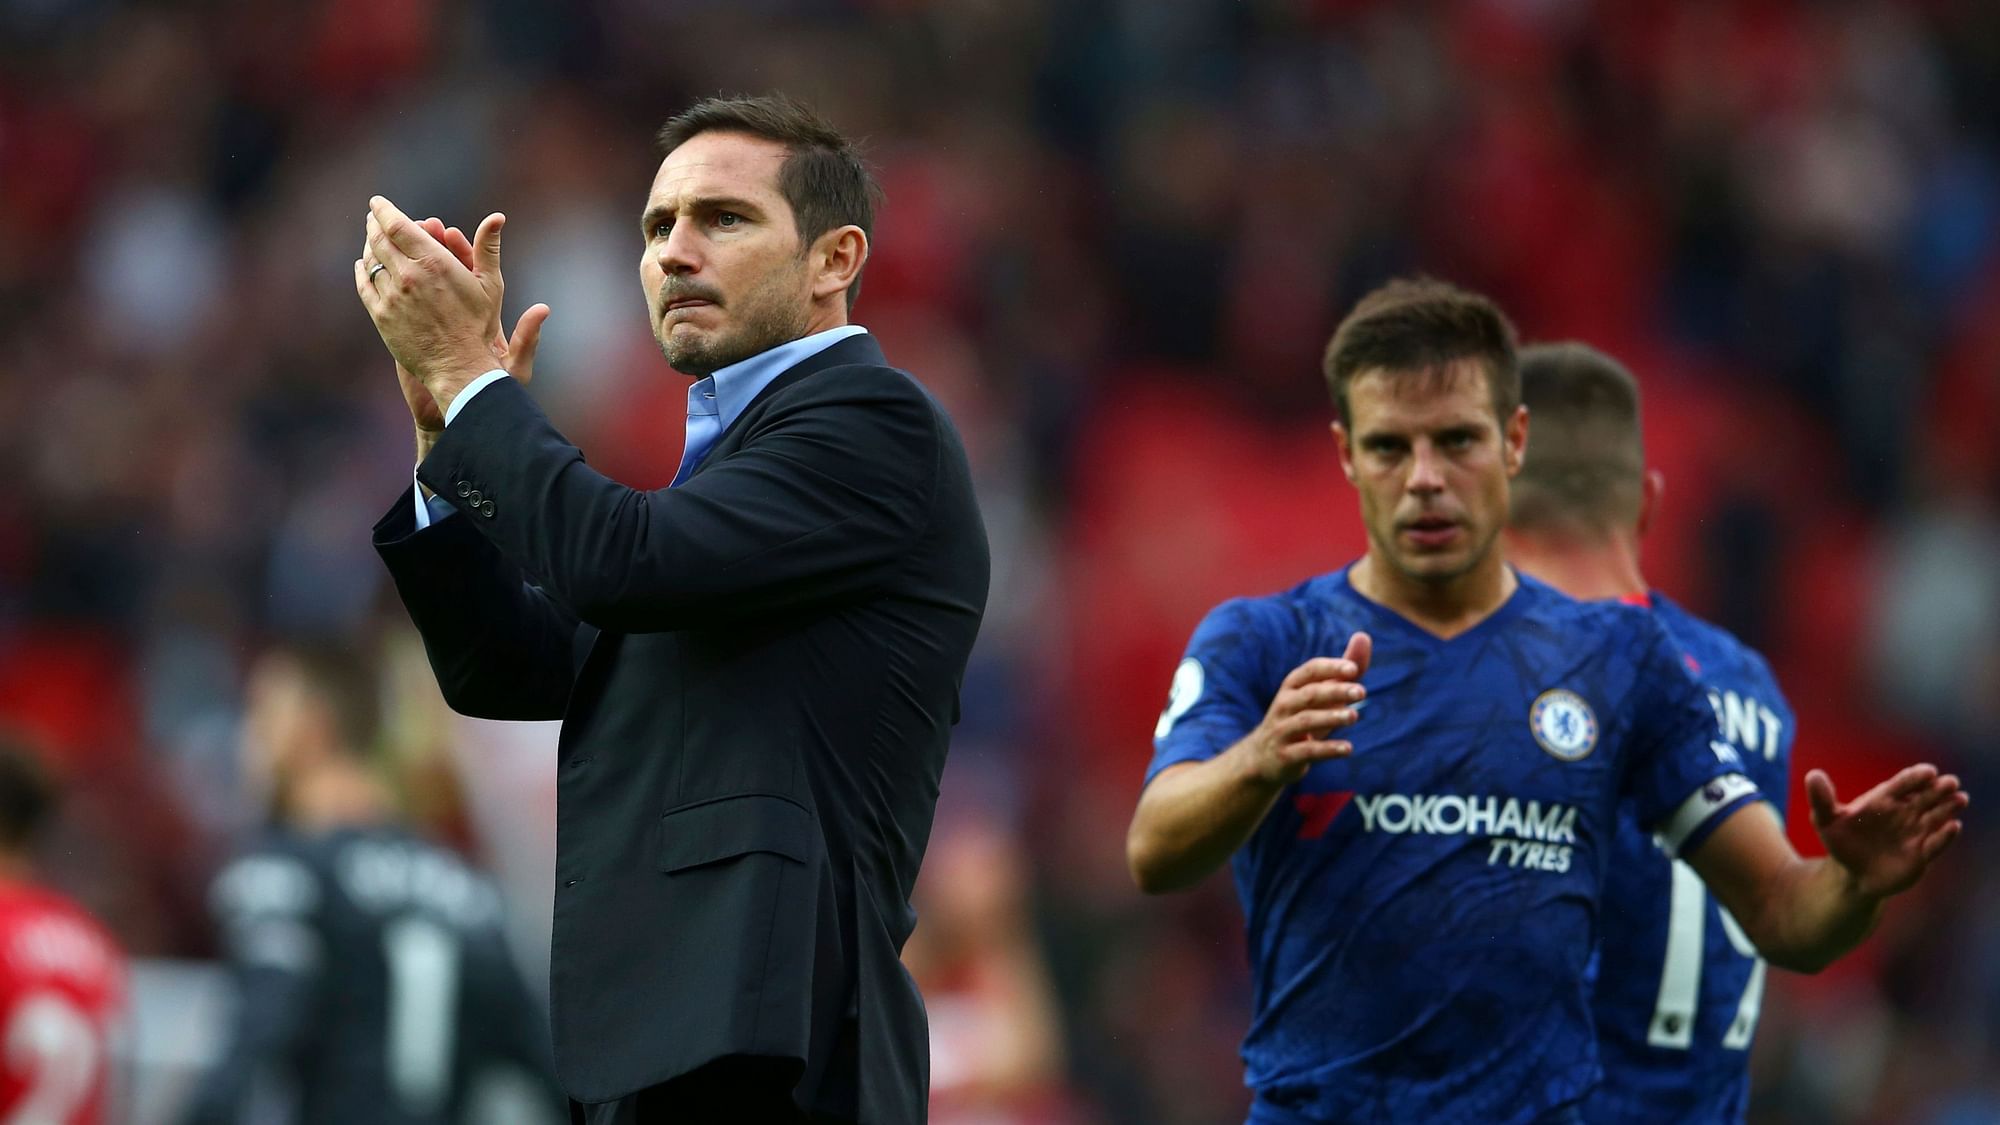 Chelsea’s head coach Frank Lampard, left, and Chelsea’s Cesar Azpilicueta acknowledge spectators after the English Premier League soccer match between Manchester United and Chelsea at Old Trafford in Manchester, England, Sunday, Aug. 11, 2019.&nbsp;